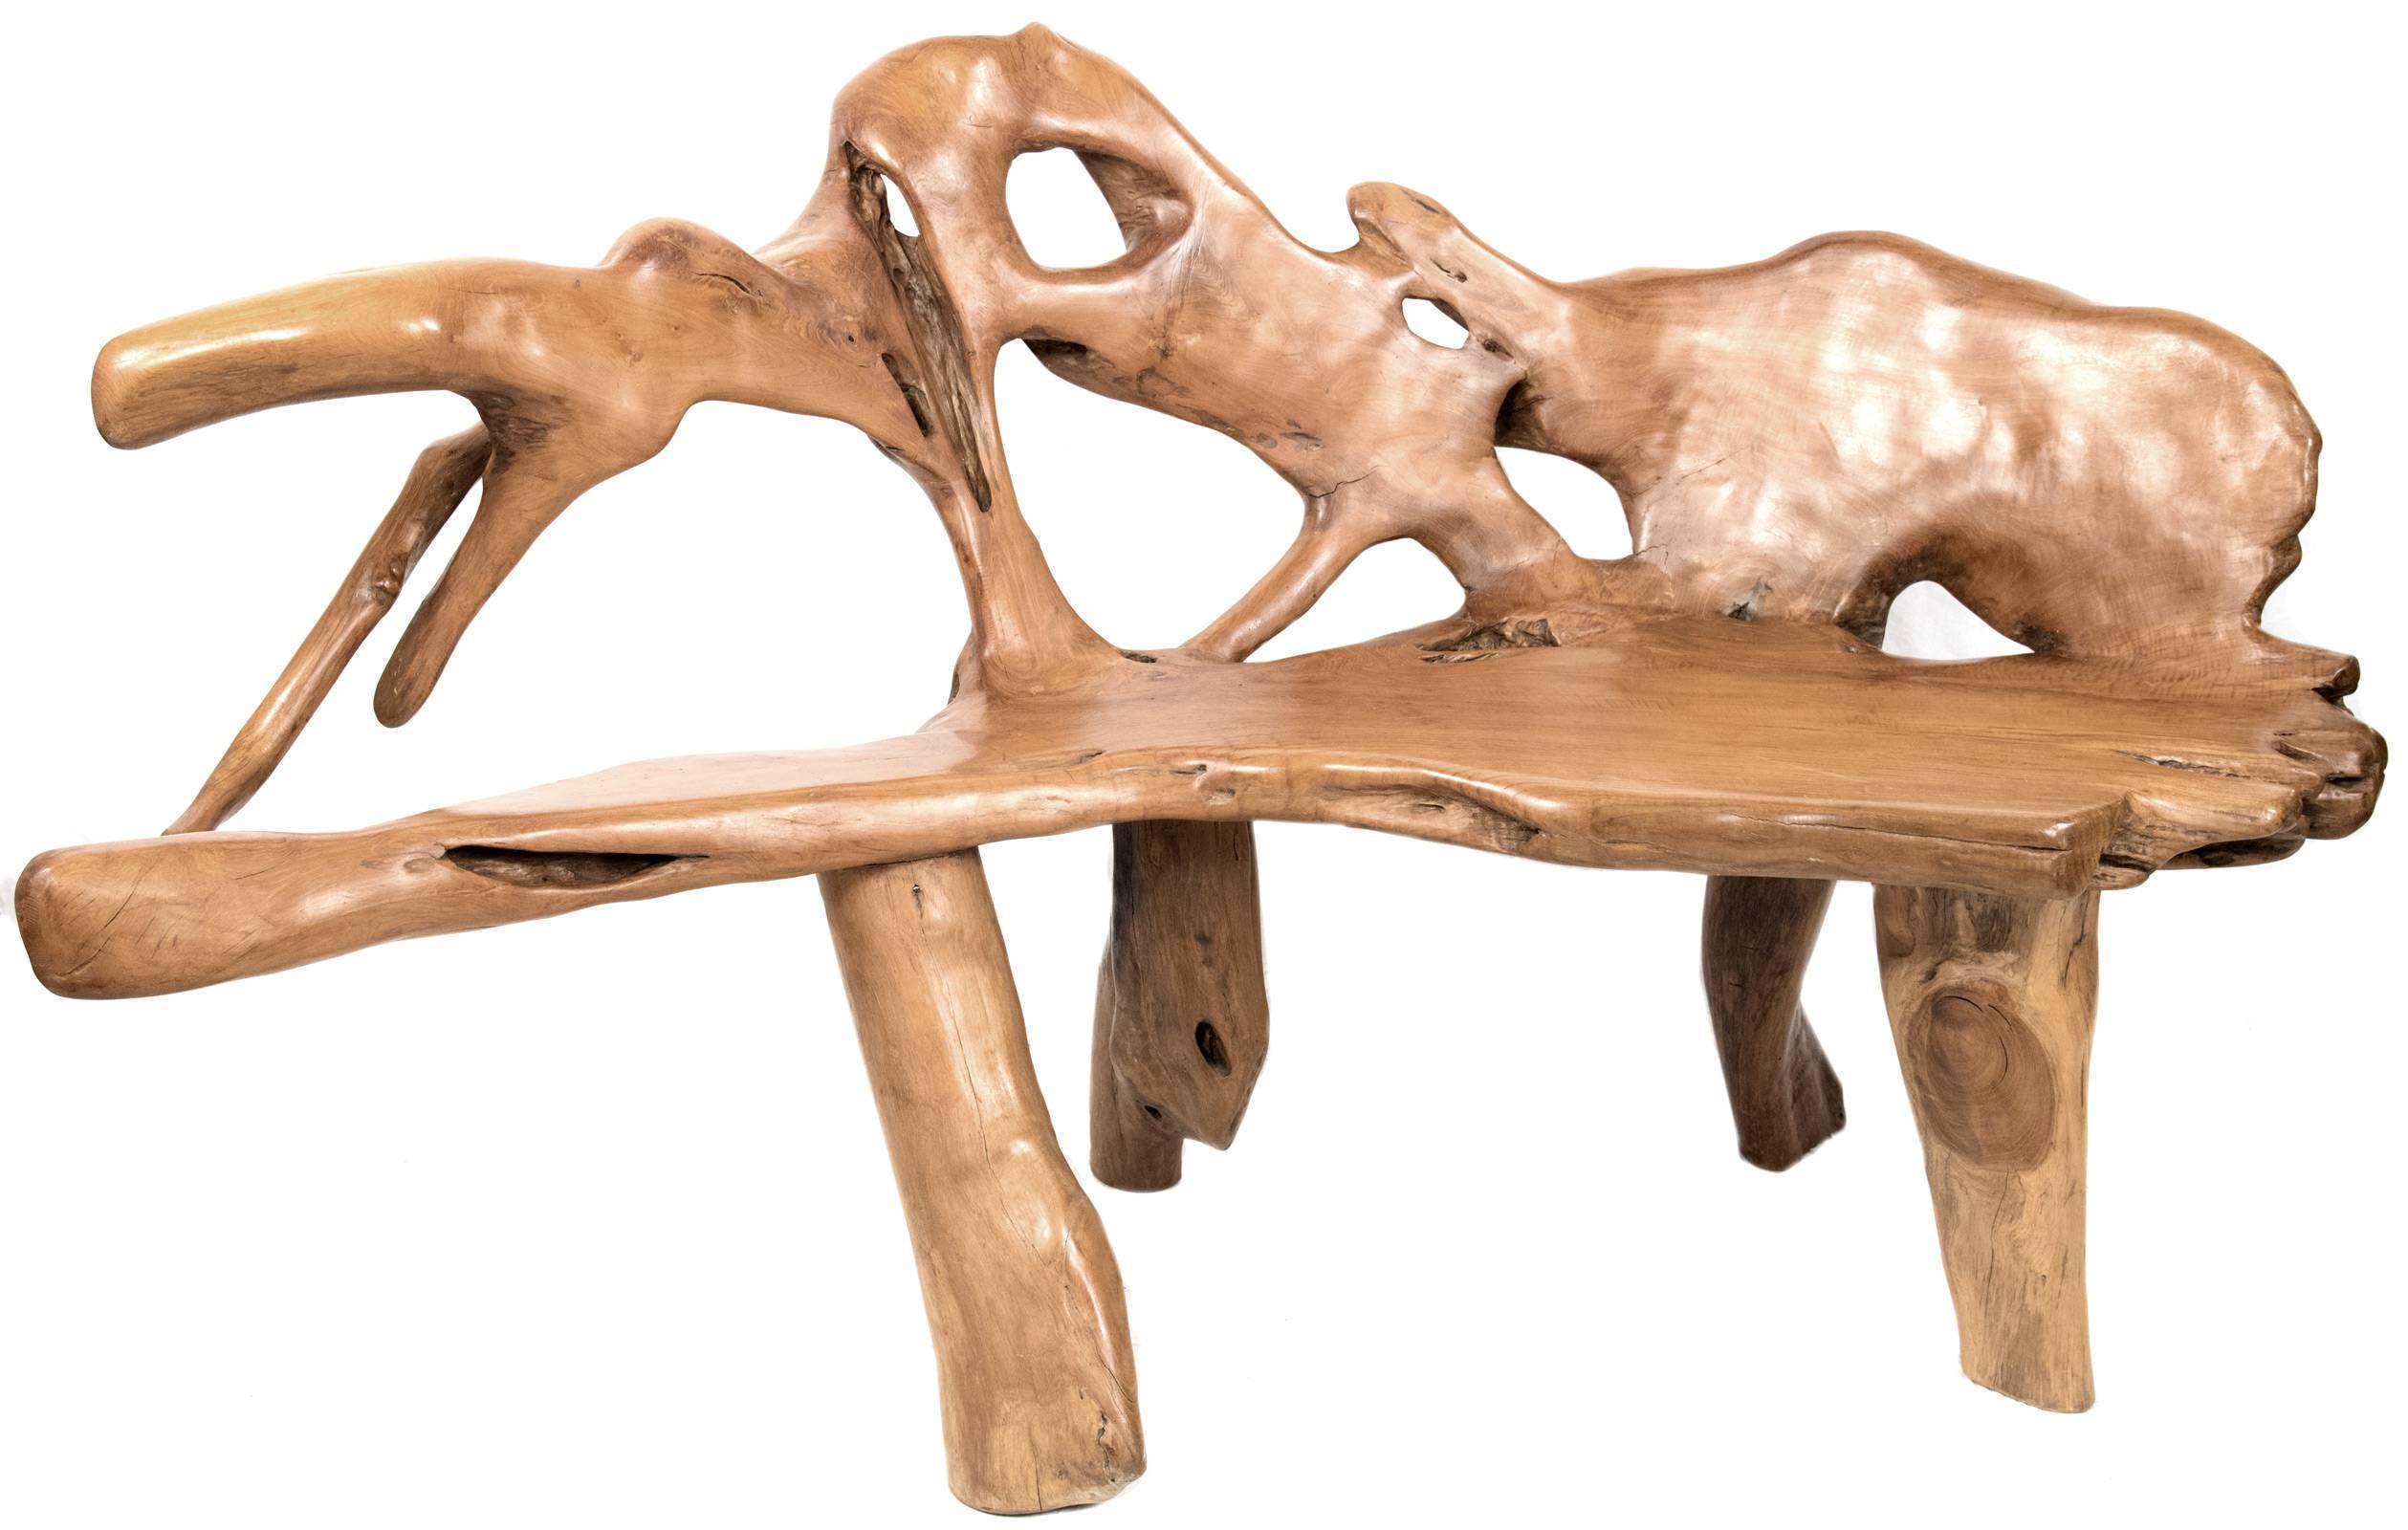 A set of rich, live edge maple chairs and benches that combine both carved and natural branch, root and trunk pieces to create sculptural, yet functional, works with strong organic lines. 
Pieces measure: 
Bench 1: 37 x 73 x 20 in. 
Bench 2: 40 x